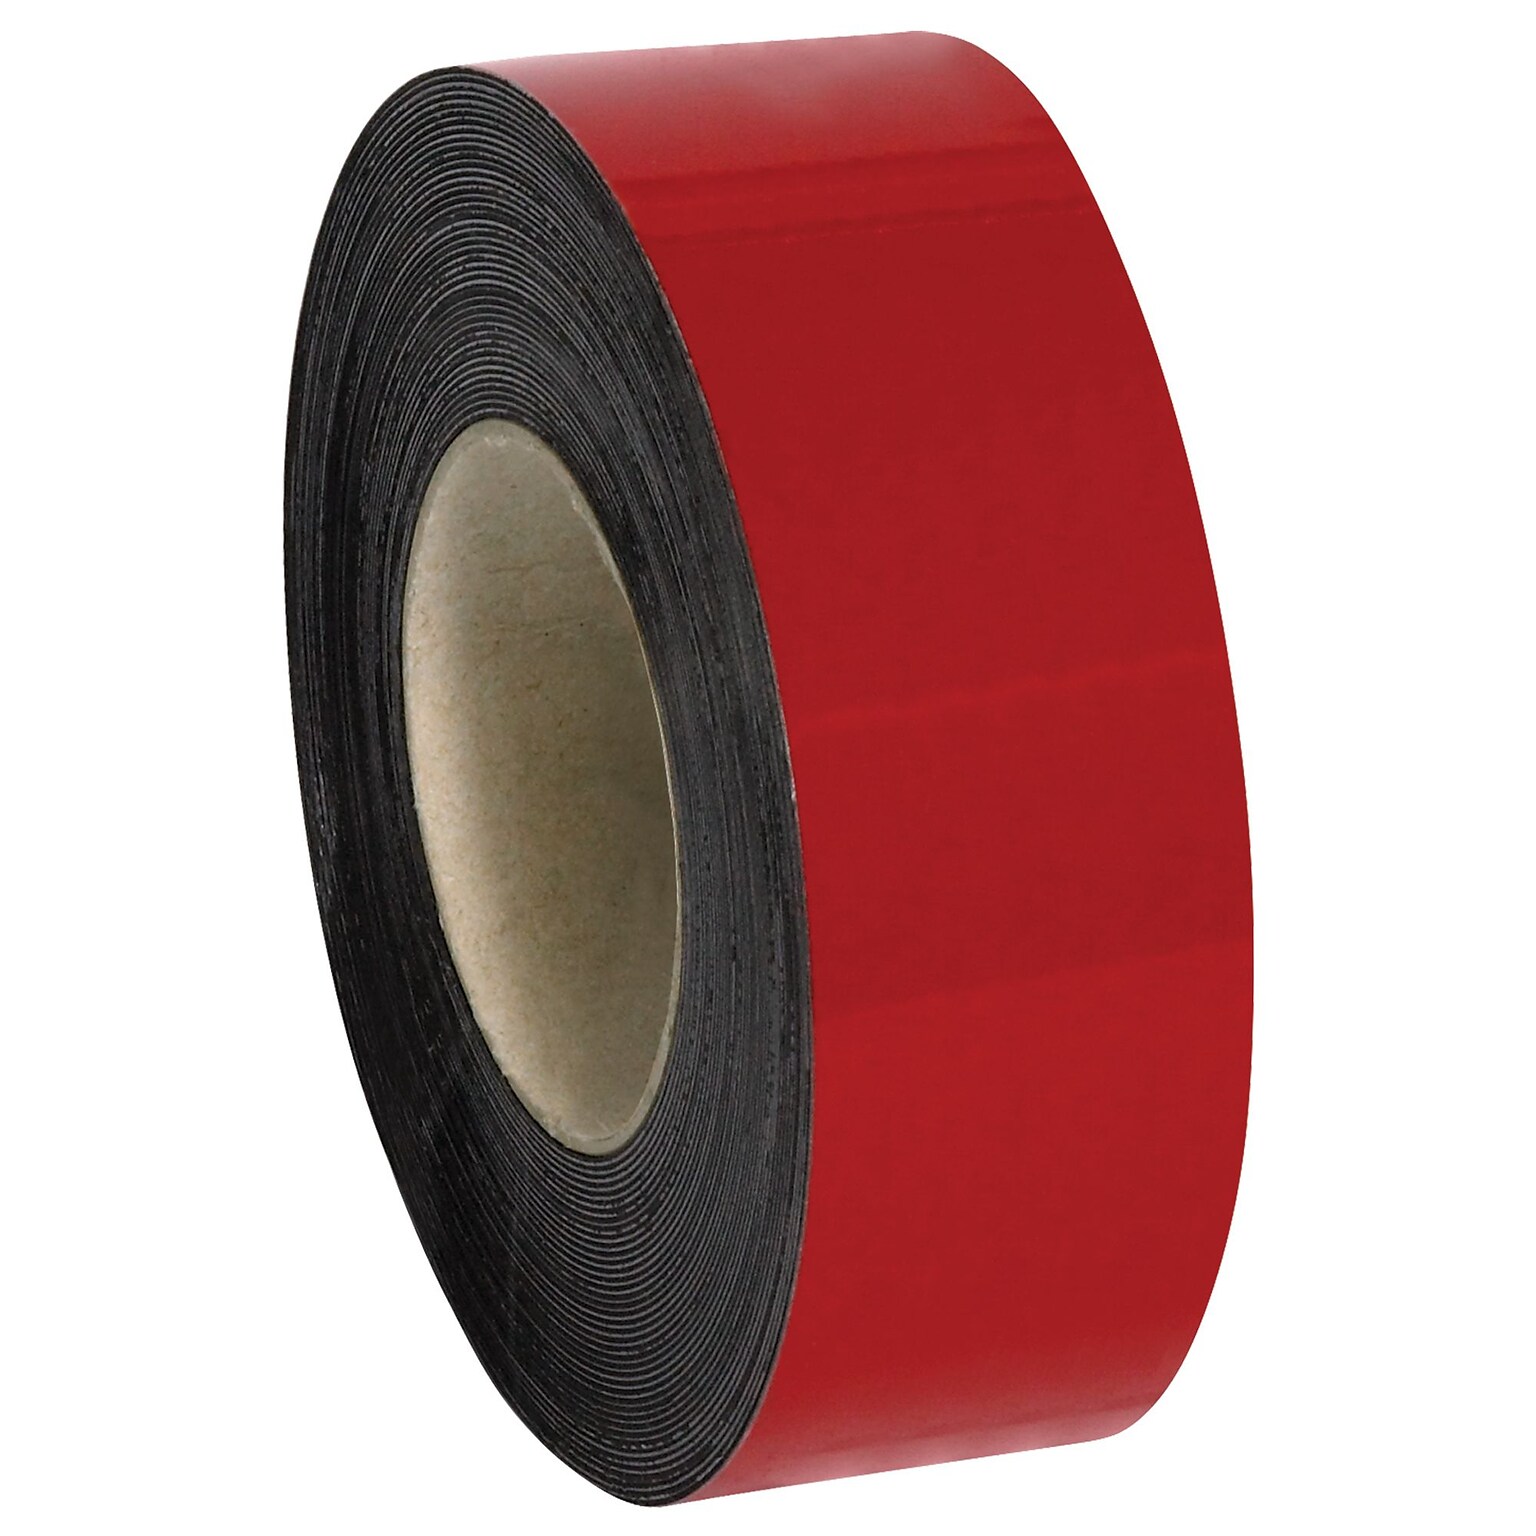 Partners Brand Warehouse Labels, Magnetic Rolls, 2 x 100, Red, 1/Case (LH148)